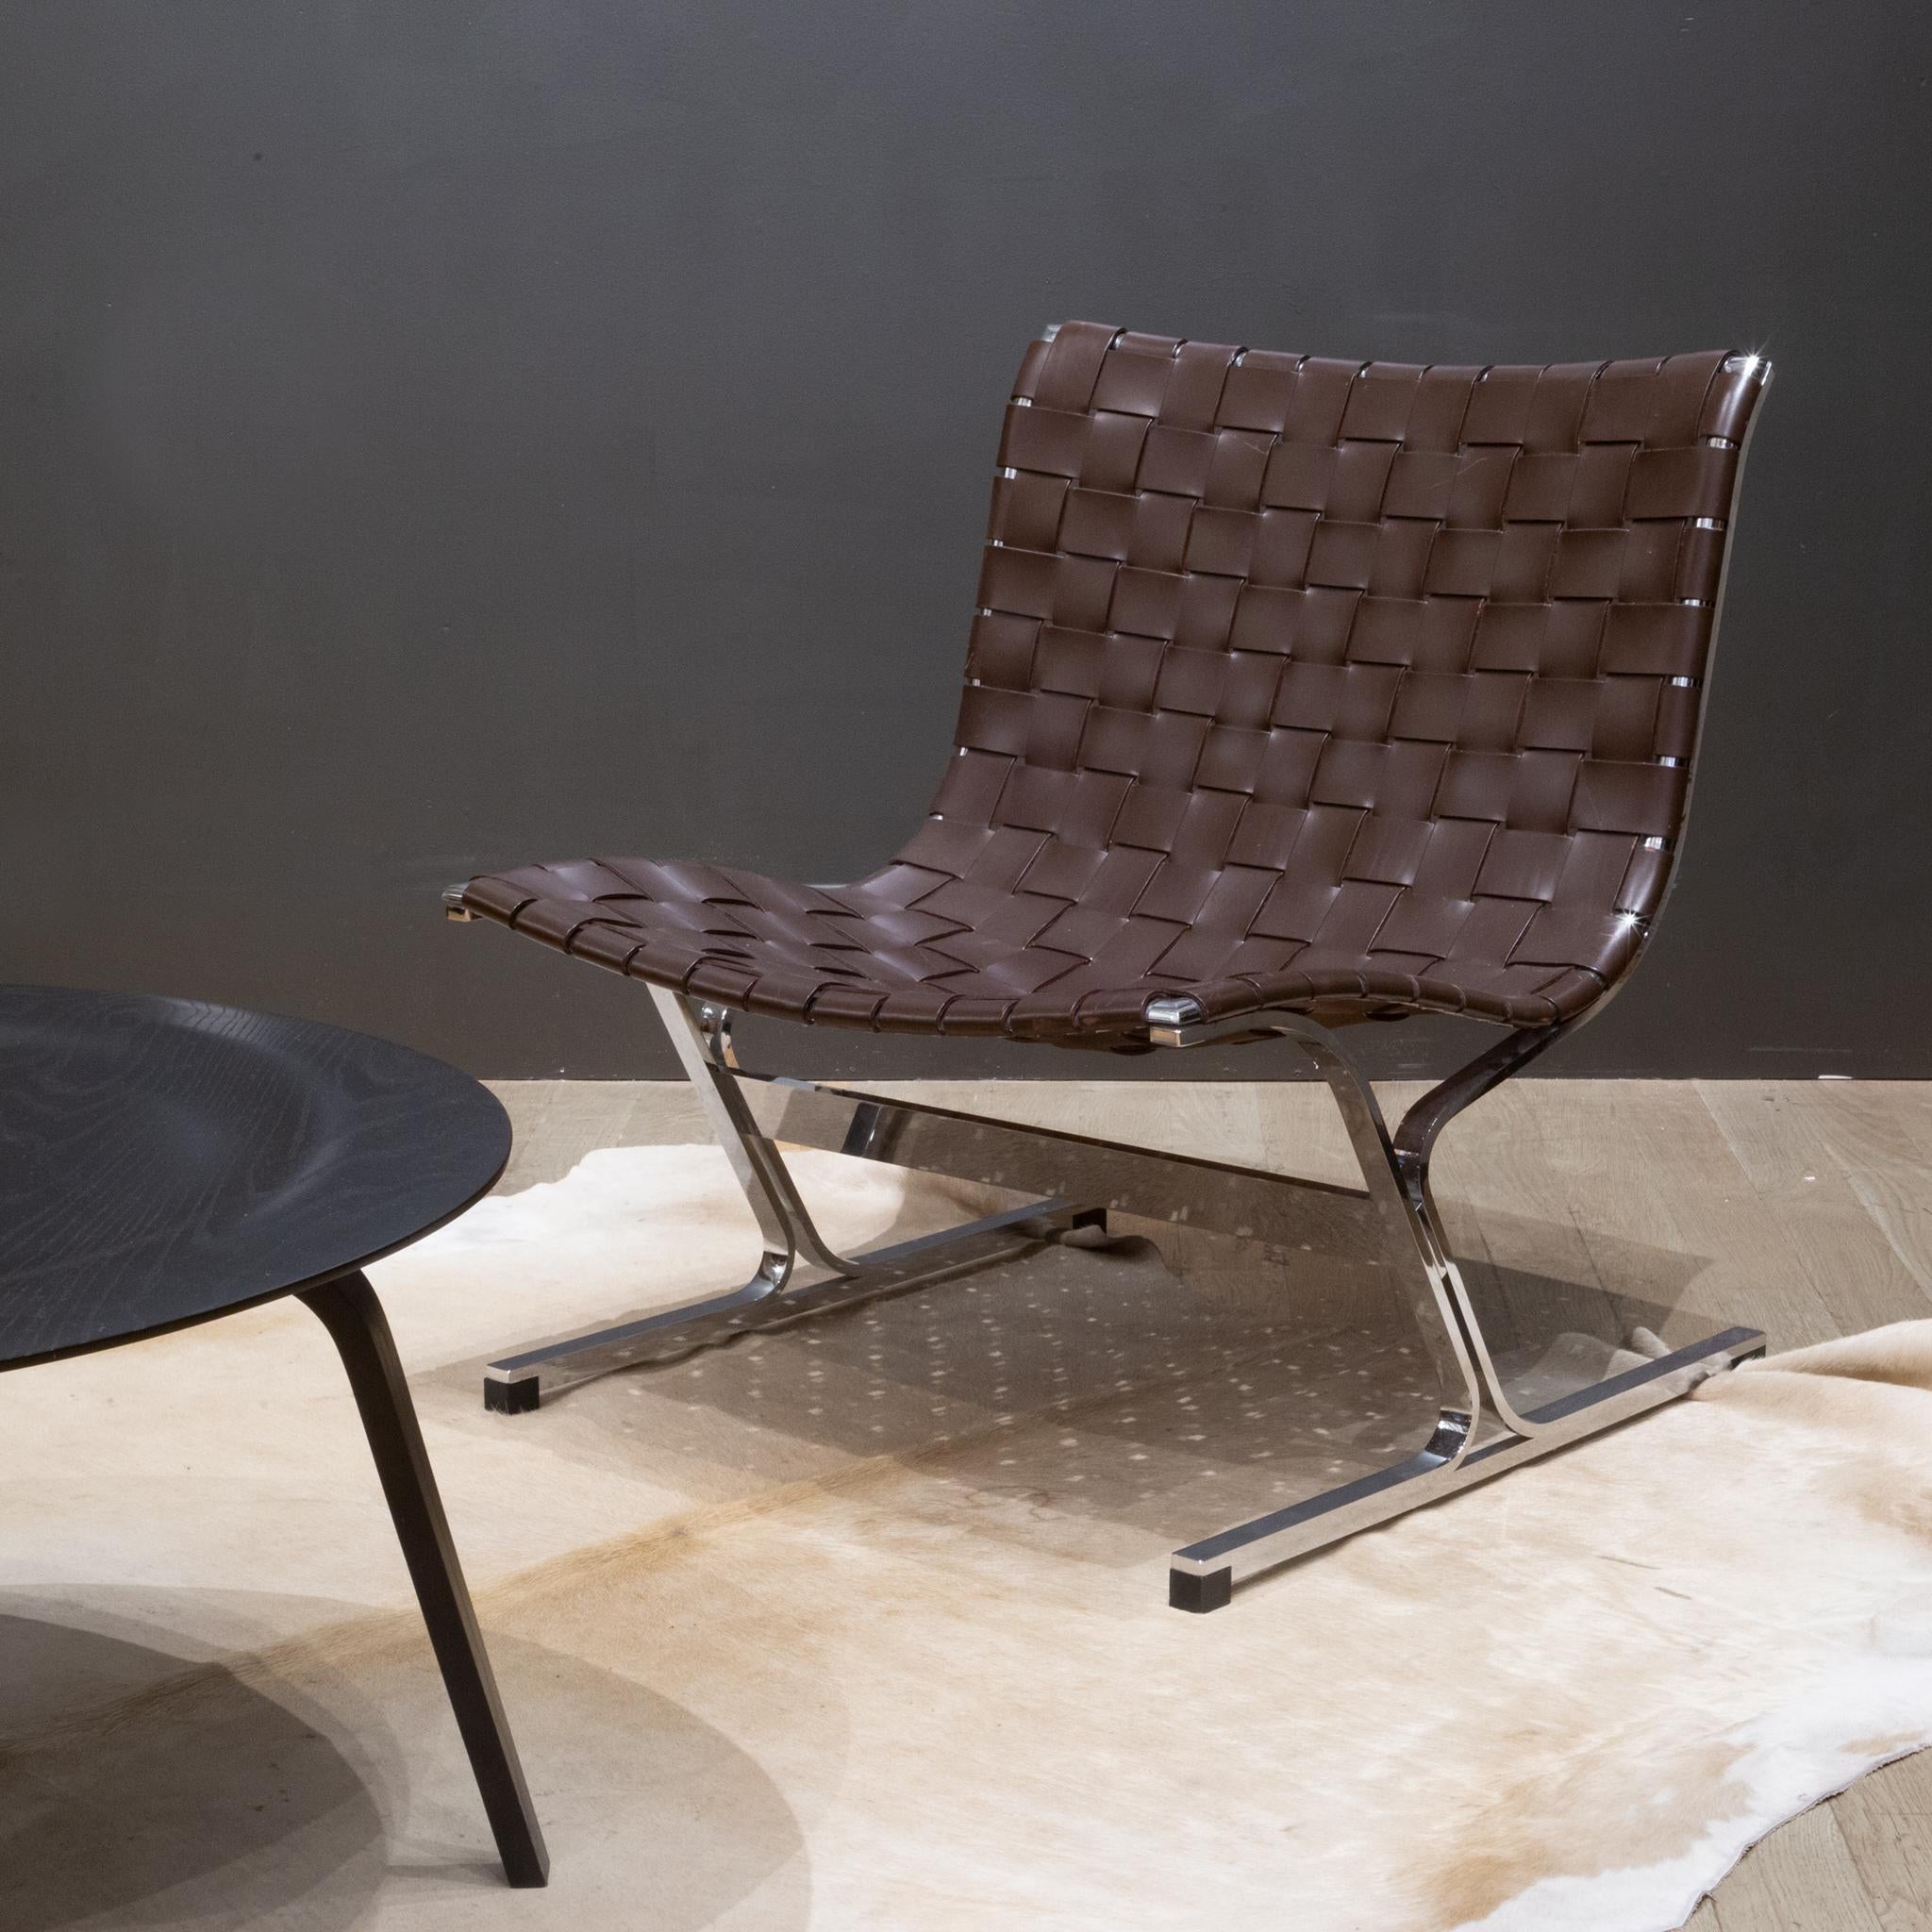 About

An original mid-century Luar lounge chairs designed by Ross Littell and manufactured by ICF De Padova, Italy, 1965. Brown leather stripes and chrome-plated solid metal frames.

Contact us for more shipping options: S16 Home San